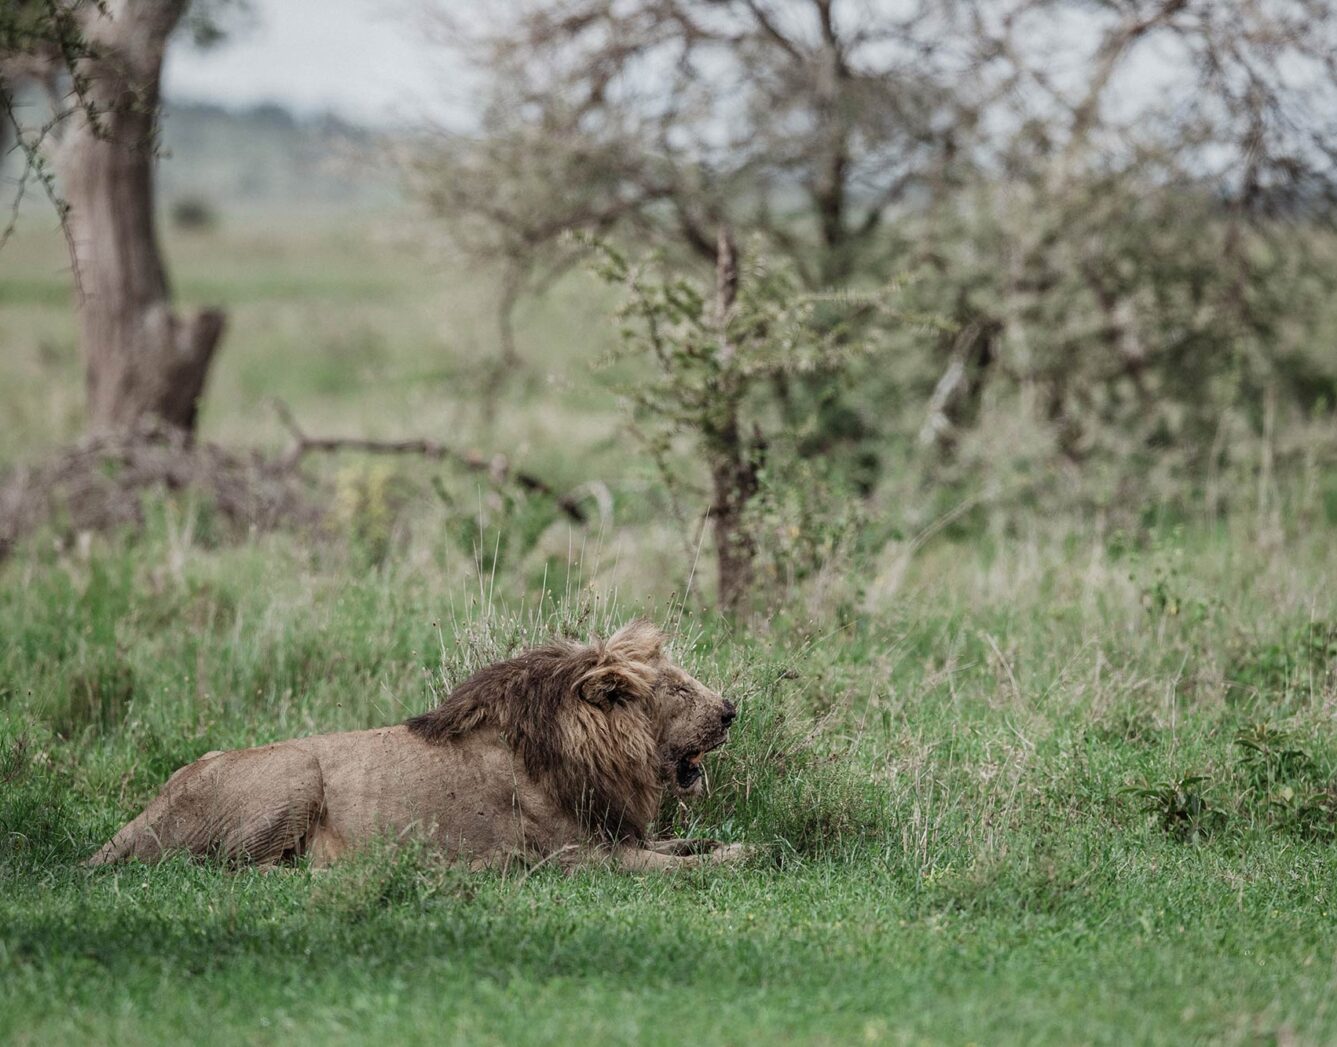 A male lion yawns in the grass